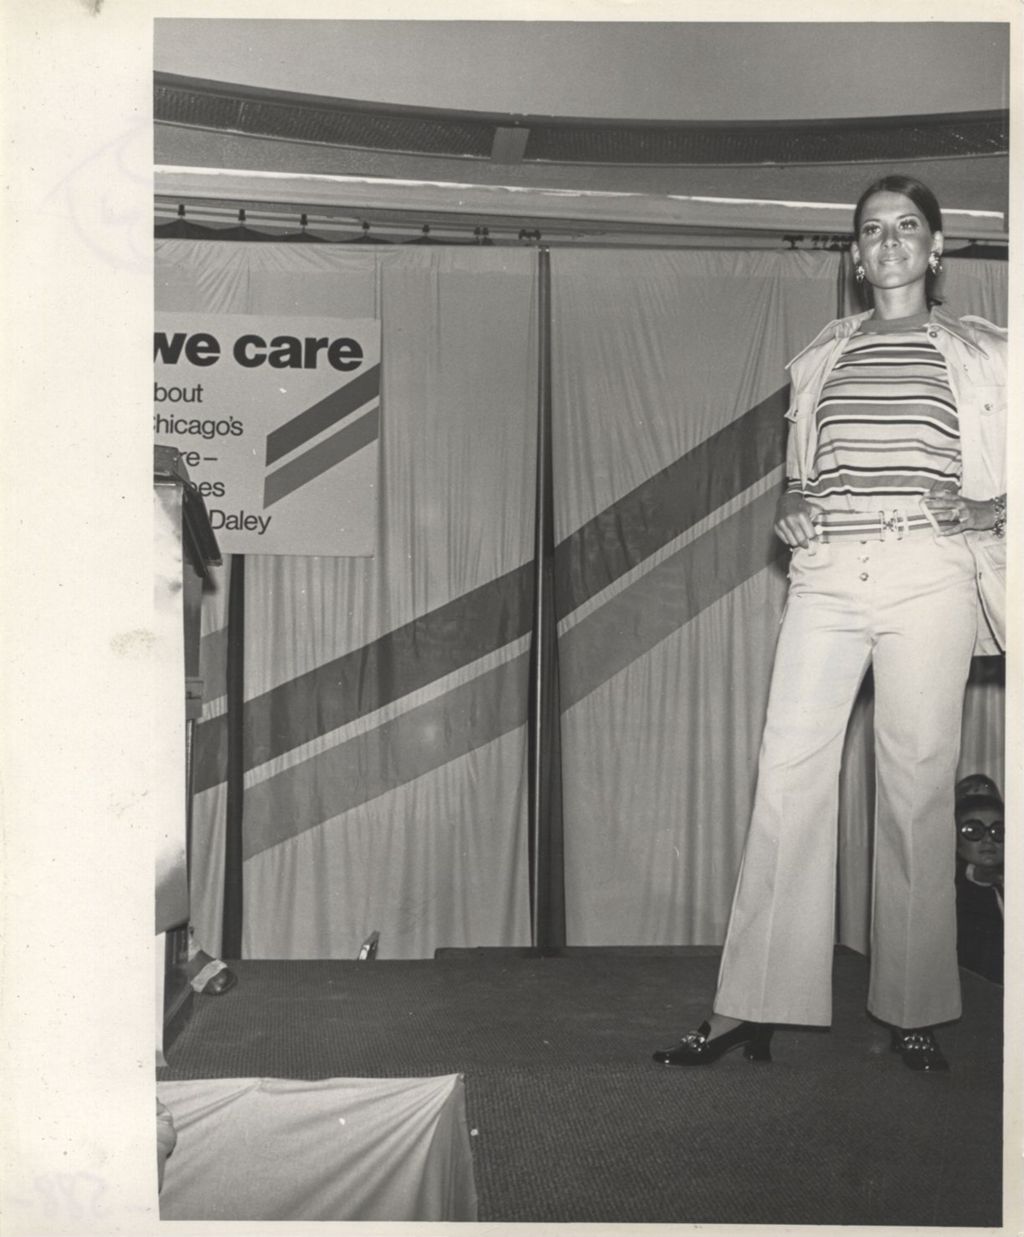 Miniature of Woman modeling an outfit at a "We Care" event